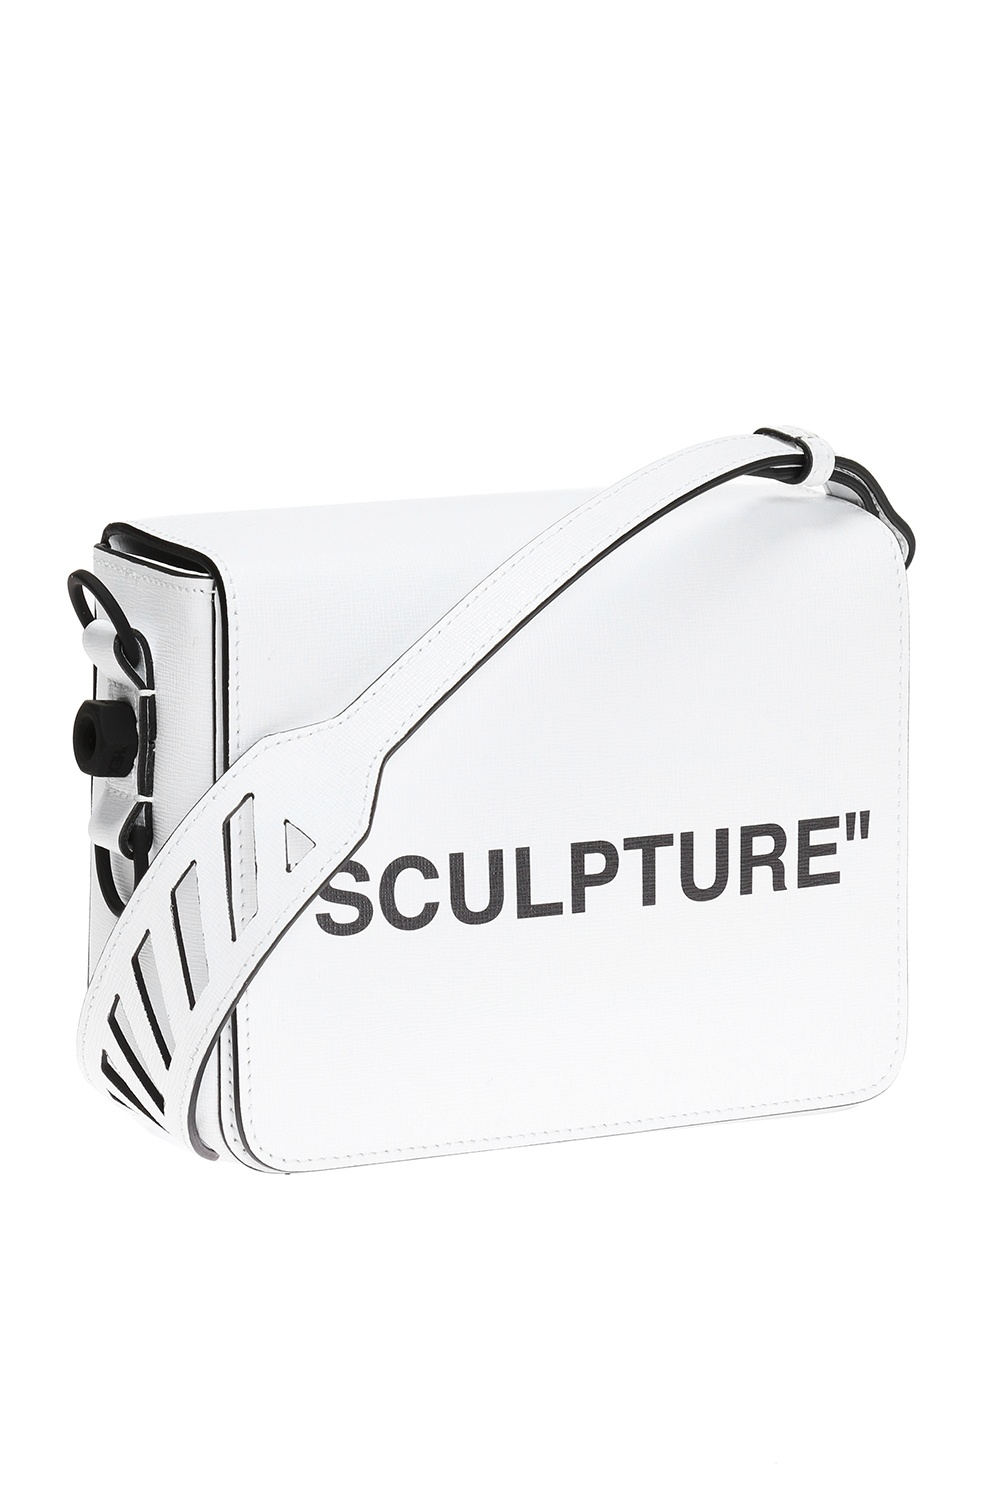 THAT OFF-WHITE SCULPTURE BAG  UK WOMEN'S FASHION, FITNESS AND LIFESTYLE  BLOG